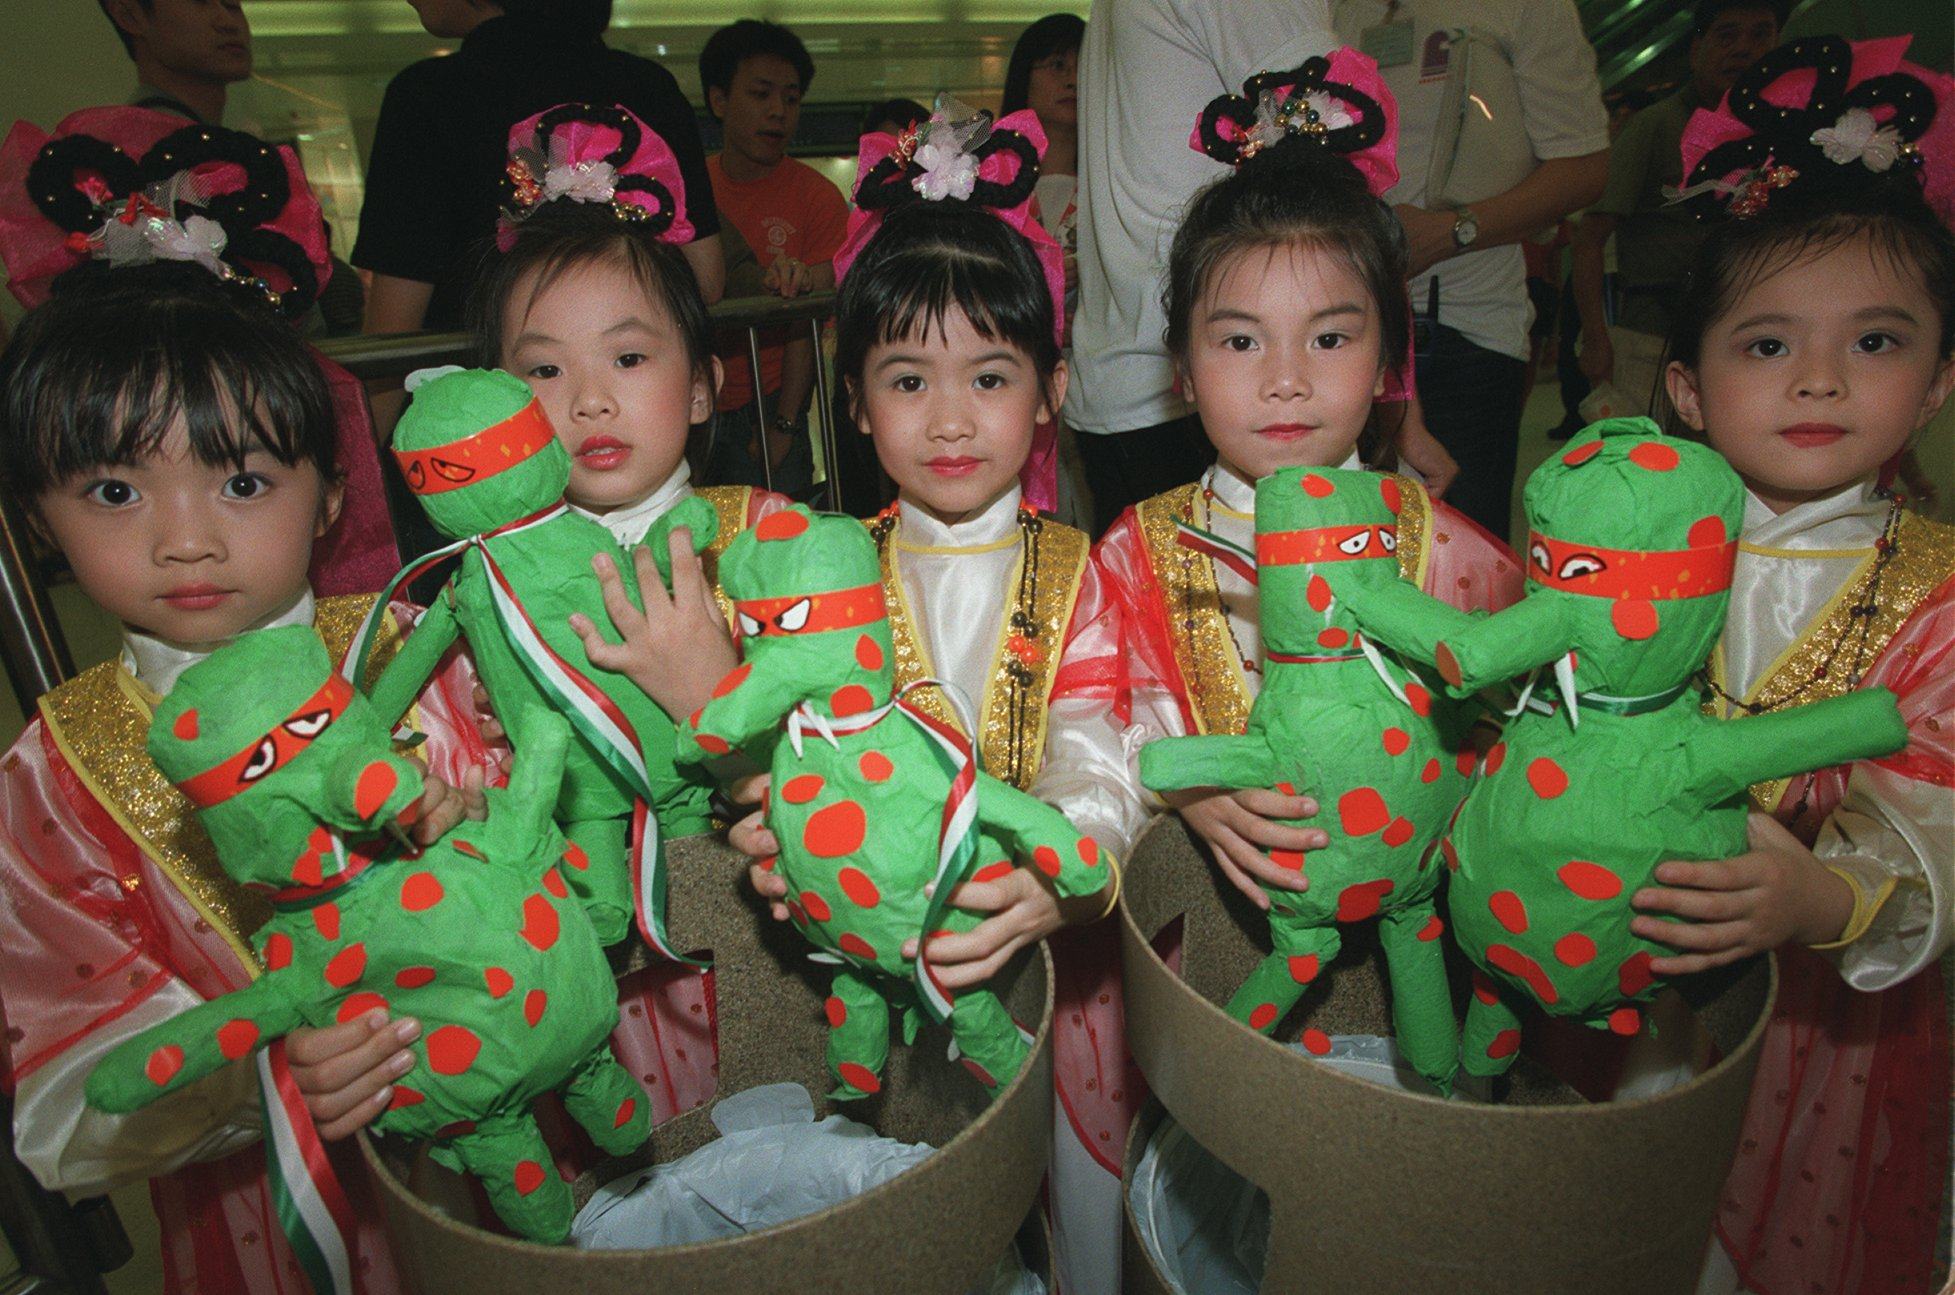 Children throw models of Lap Sap Chung into rubbish bins at the opening of the Clean Hong Kong Campaign in Hang Hau, Sai Kung in July 2001. Photo: Dickson Lee